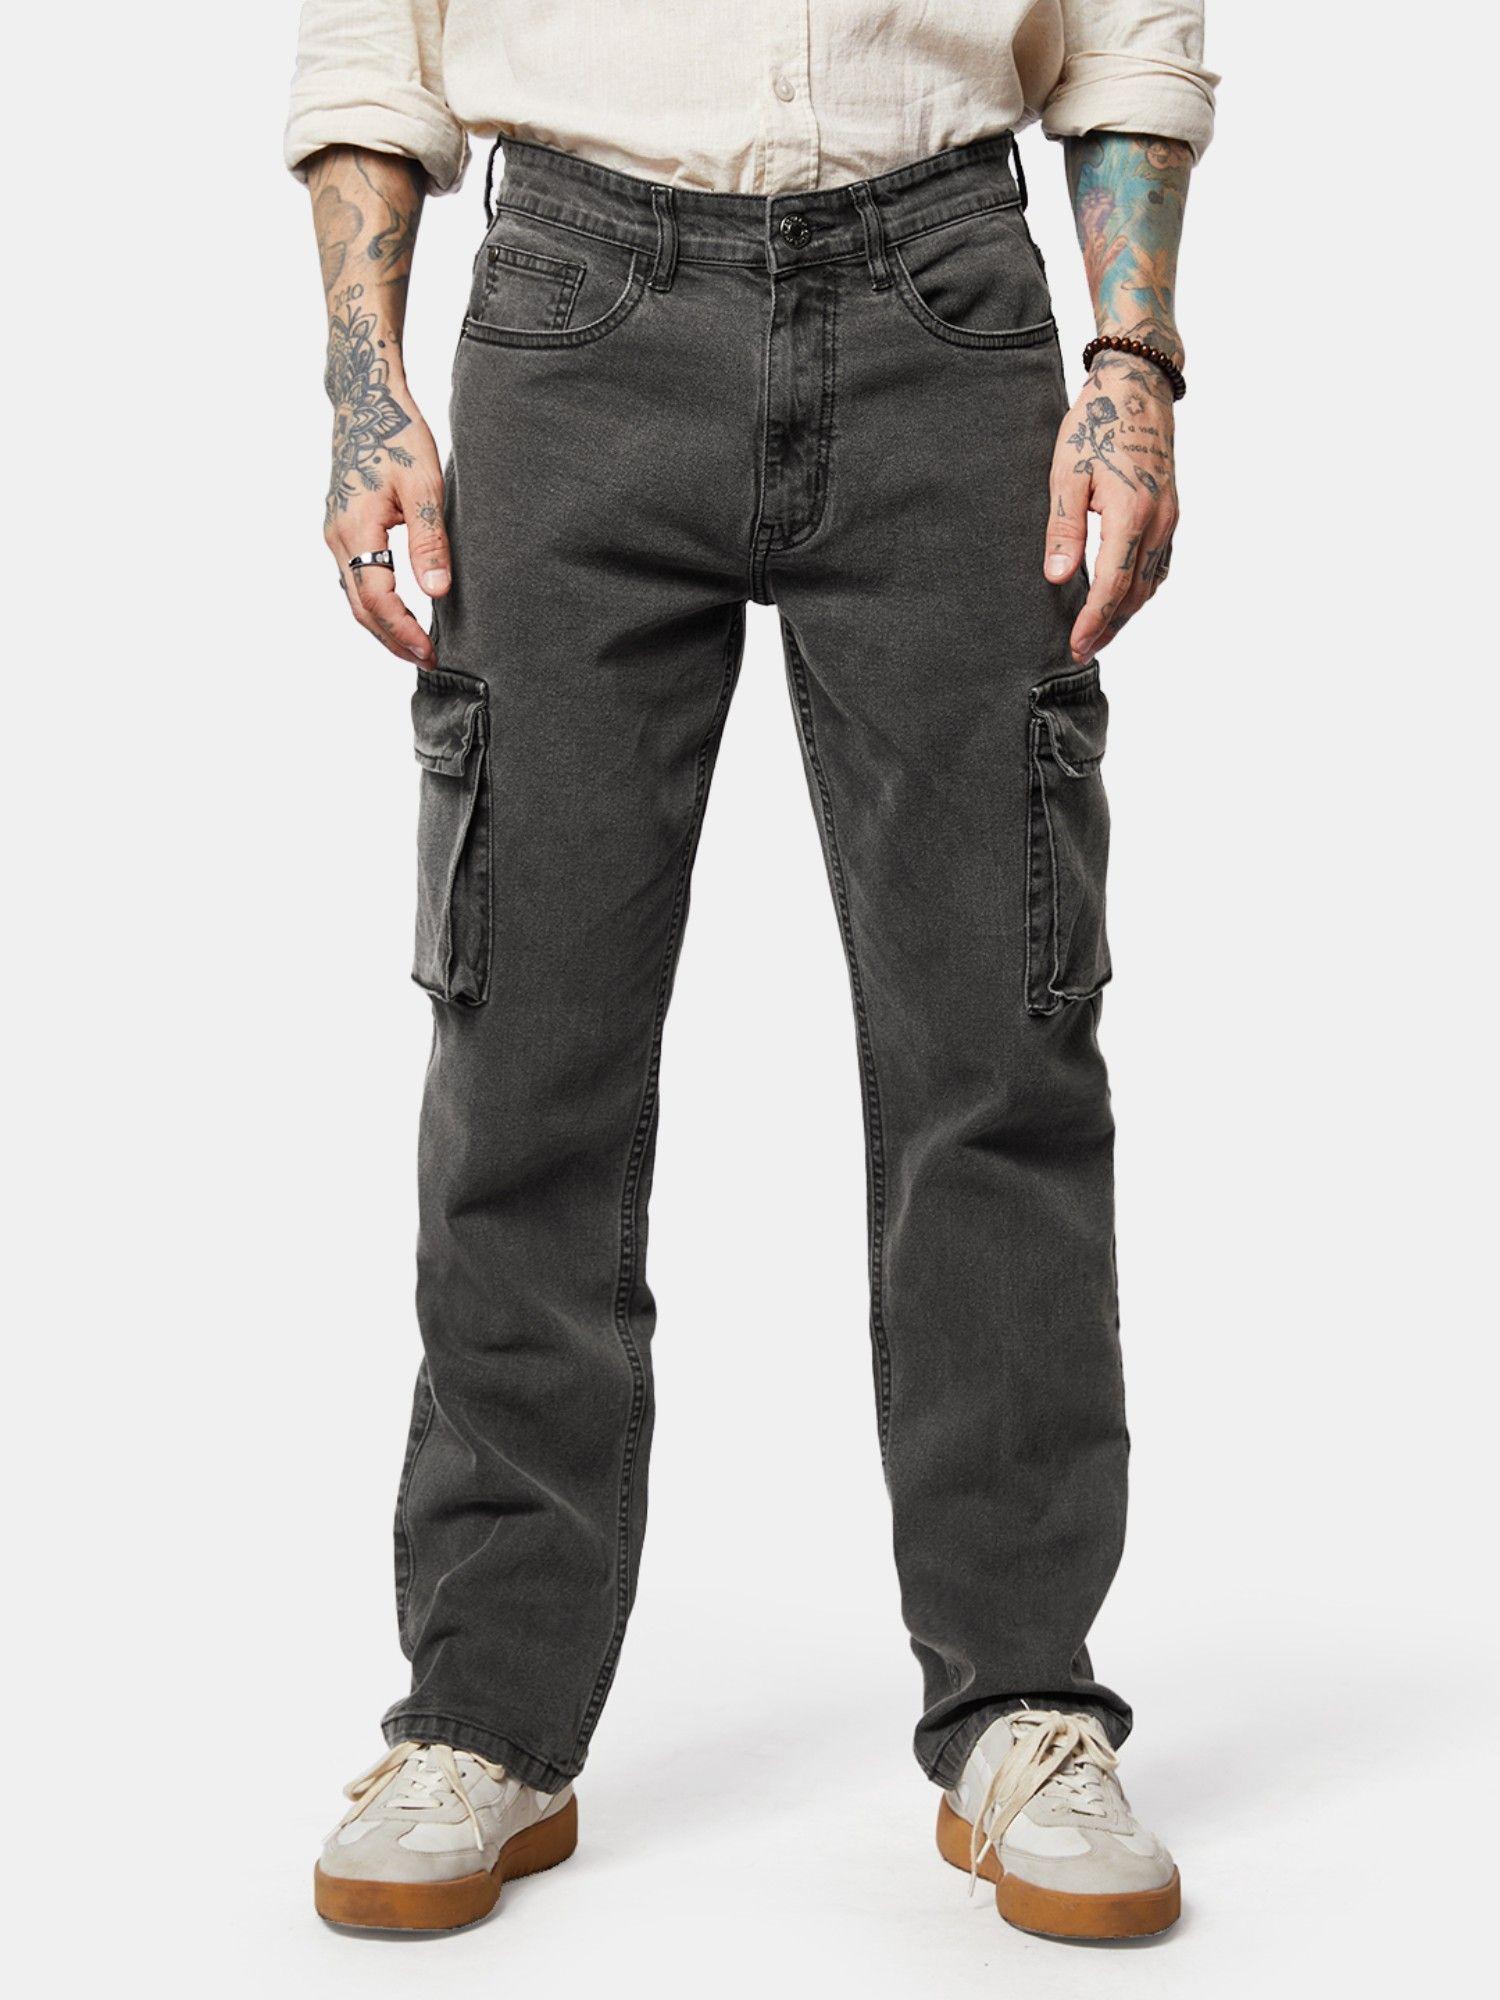 solids : ash grey straight fit men cargo jeans